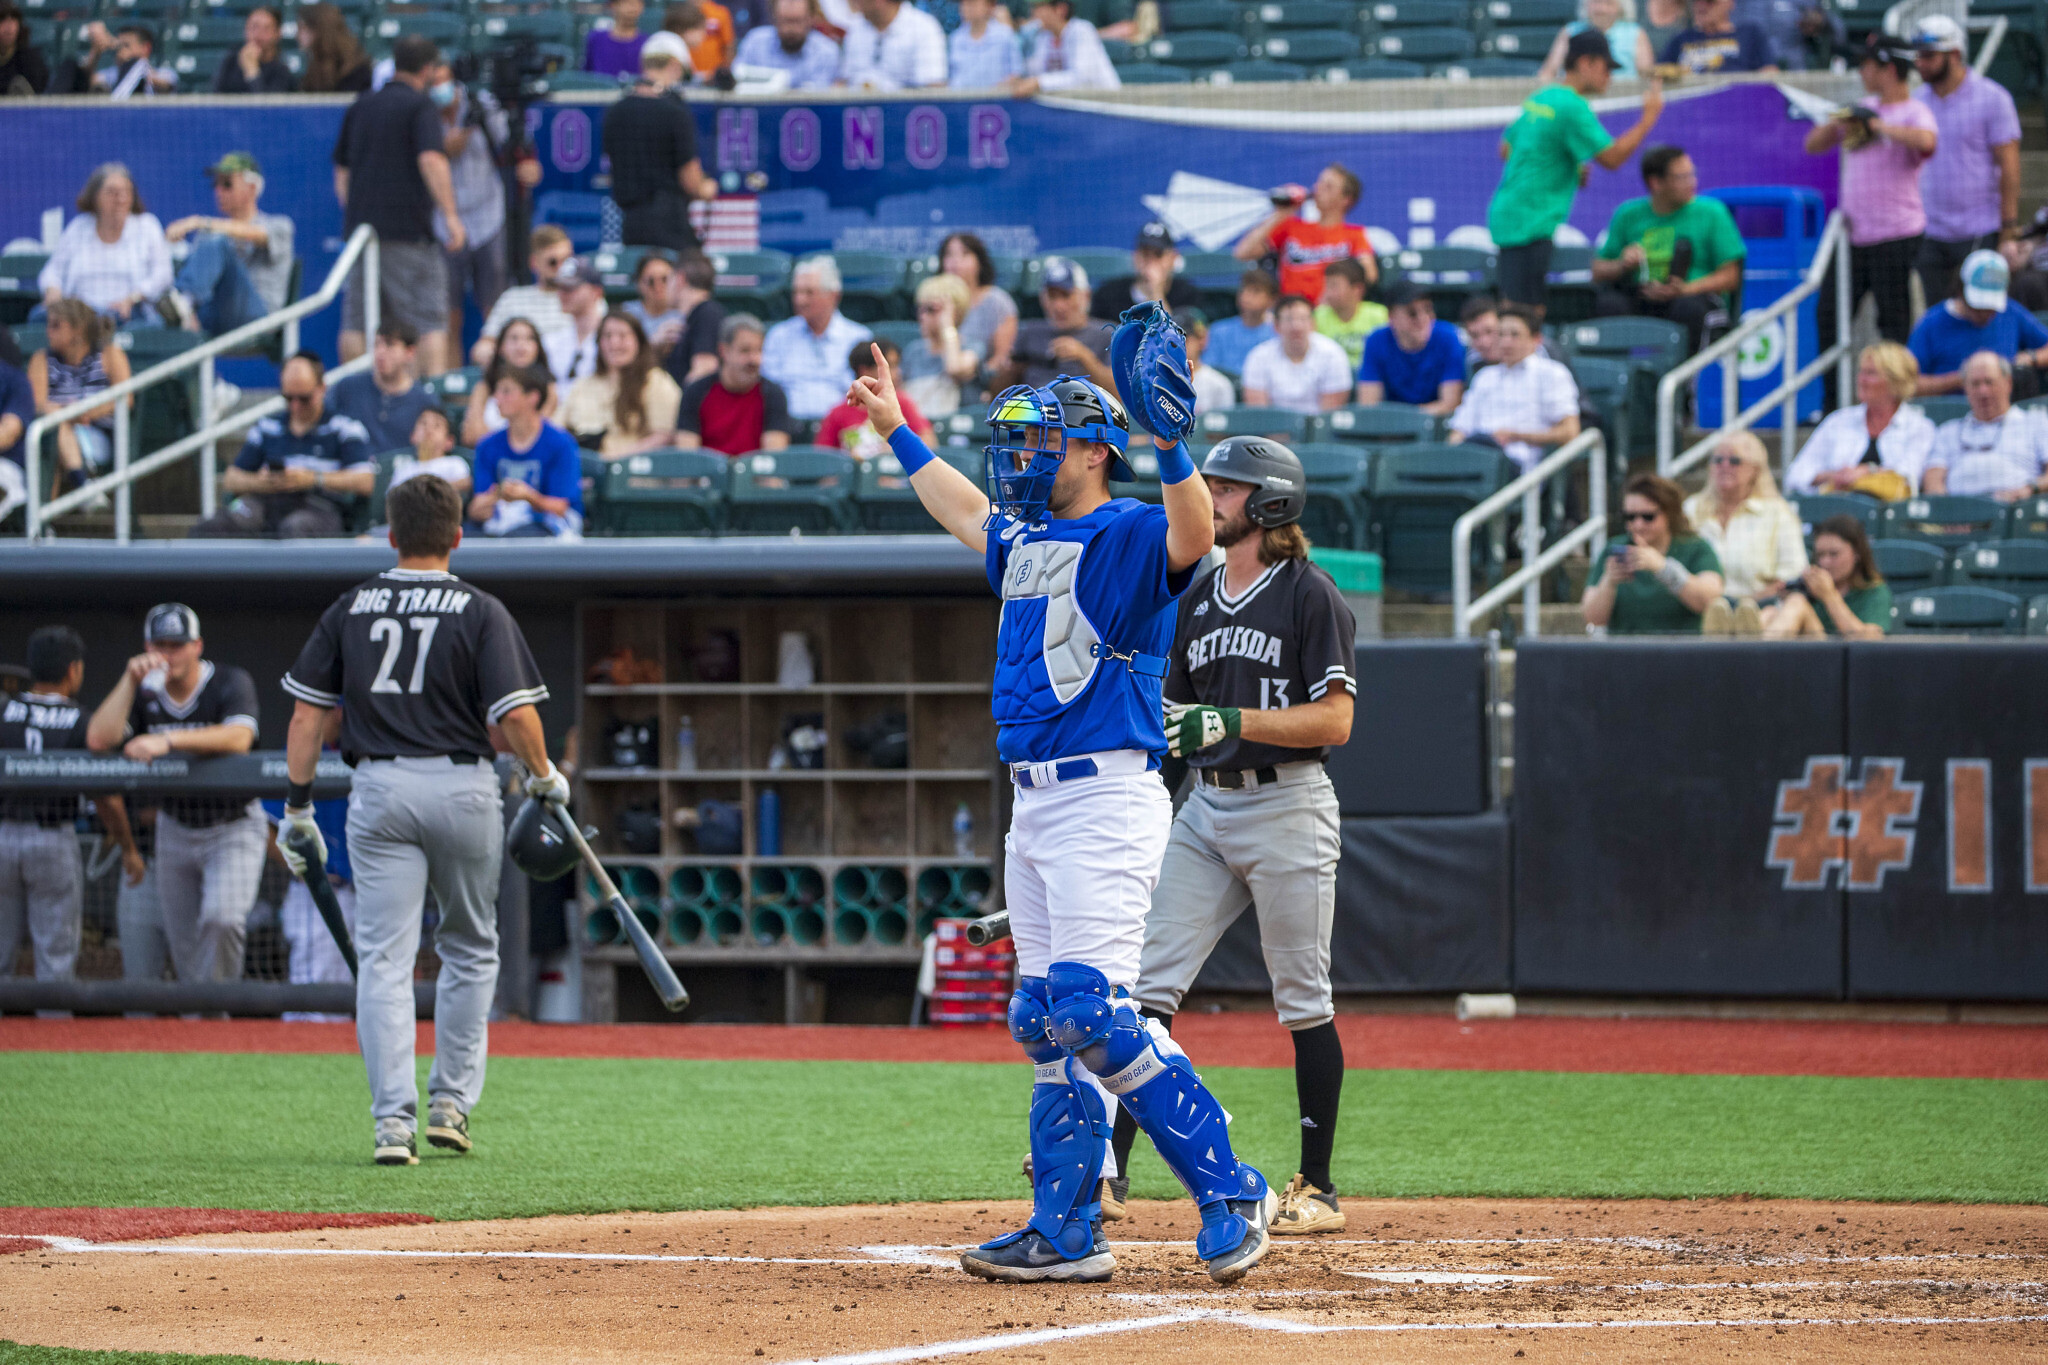 Catcher Ryan Lavarnway playing for Team Israel in this undated photo. (Courtesy IAB)